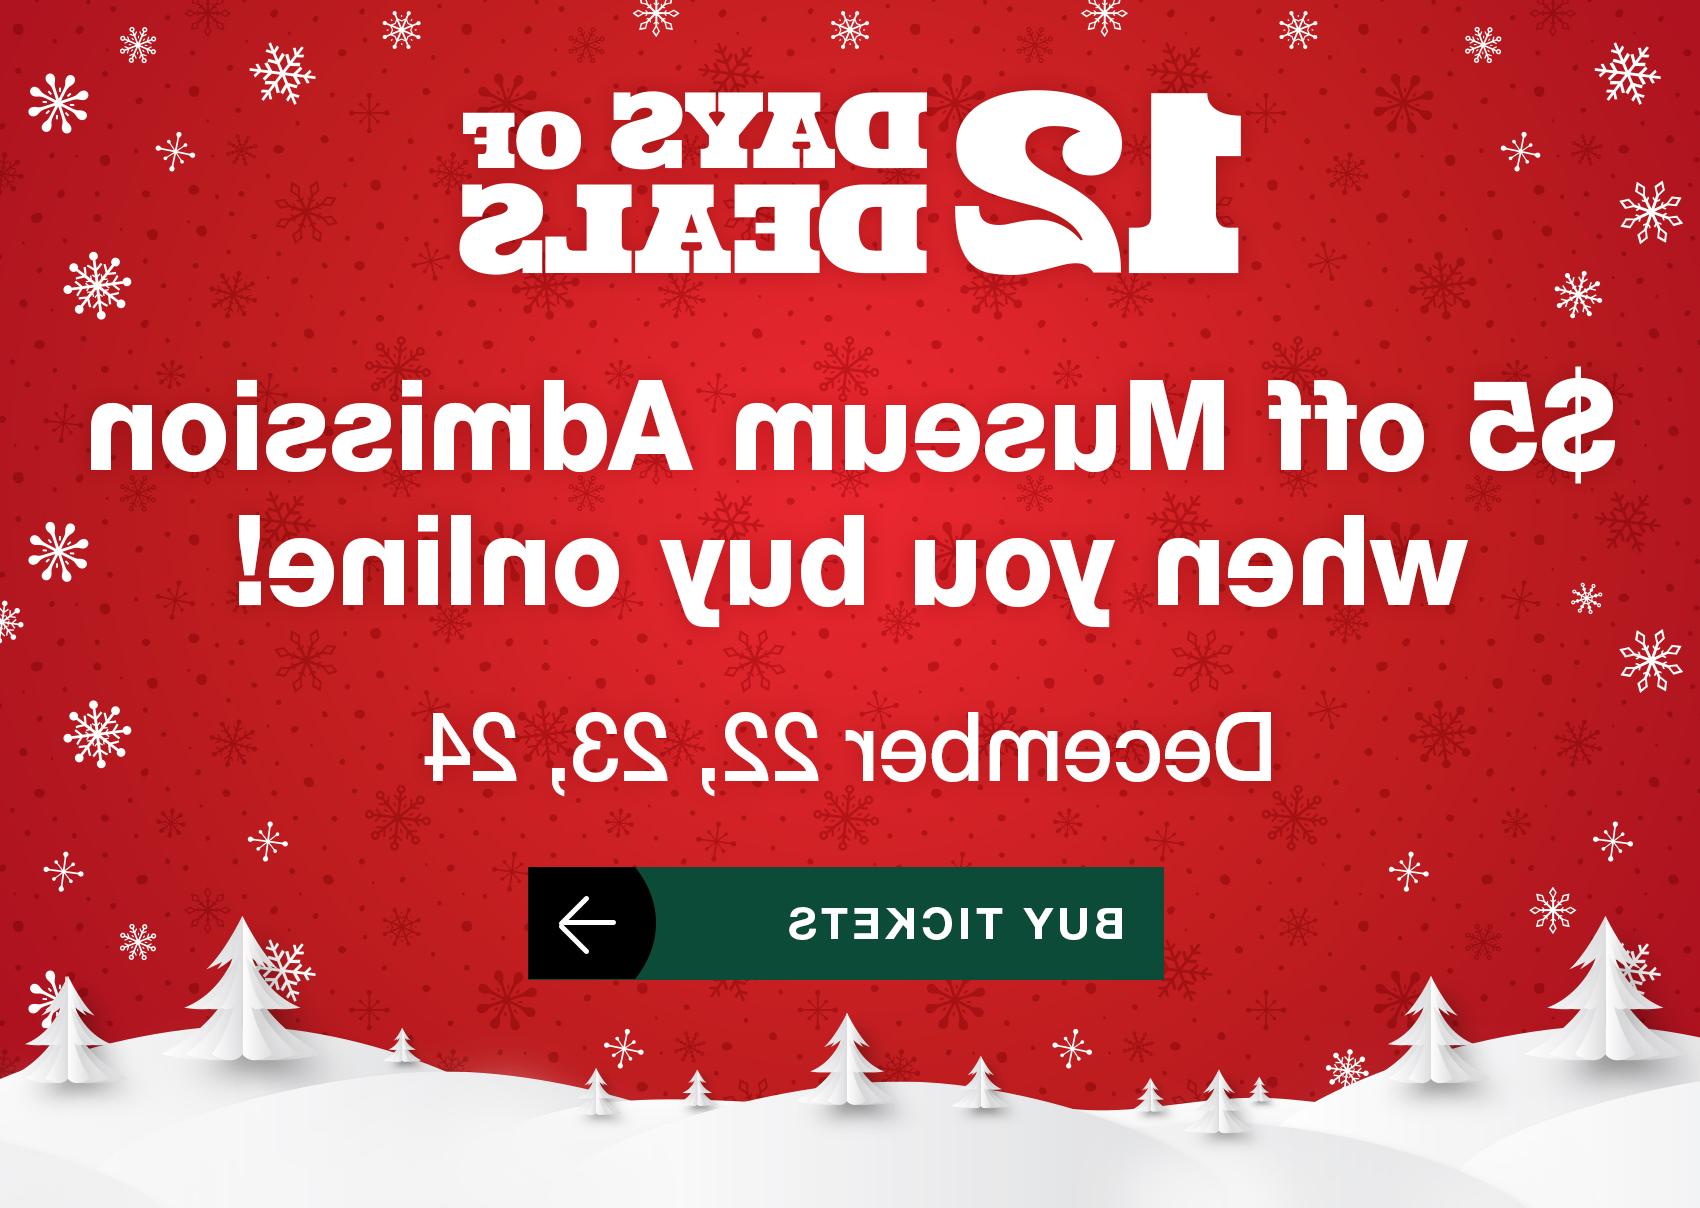 12 Days of Deals! $5 off Museum Admission when you buy online! December 22, 23, 24. Buy Tickets.